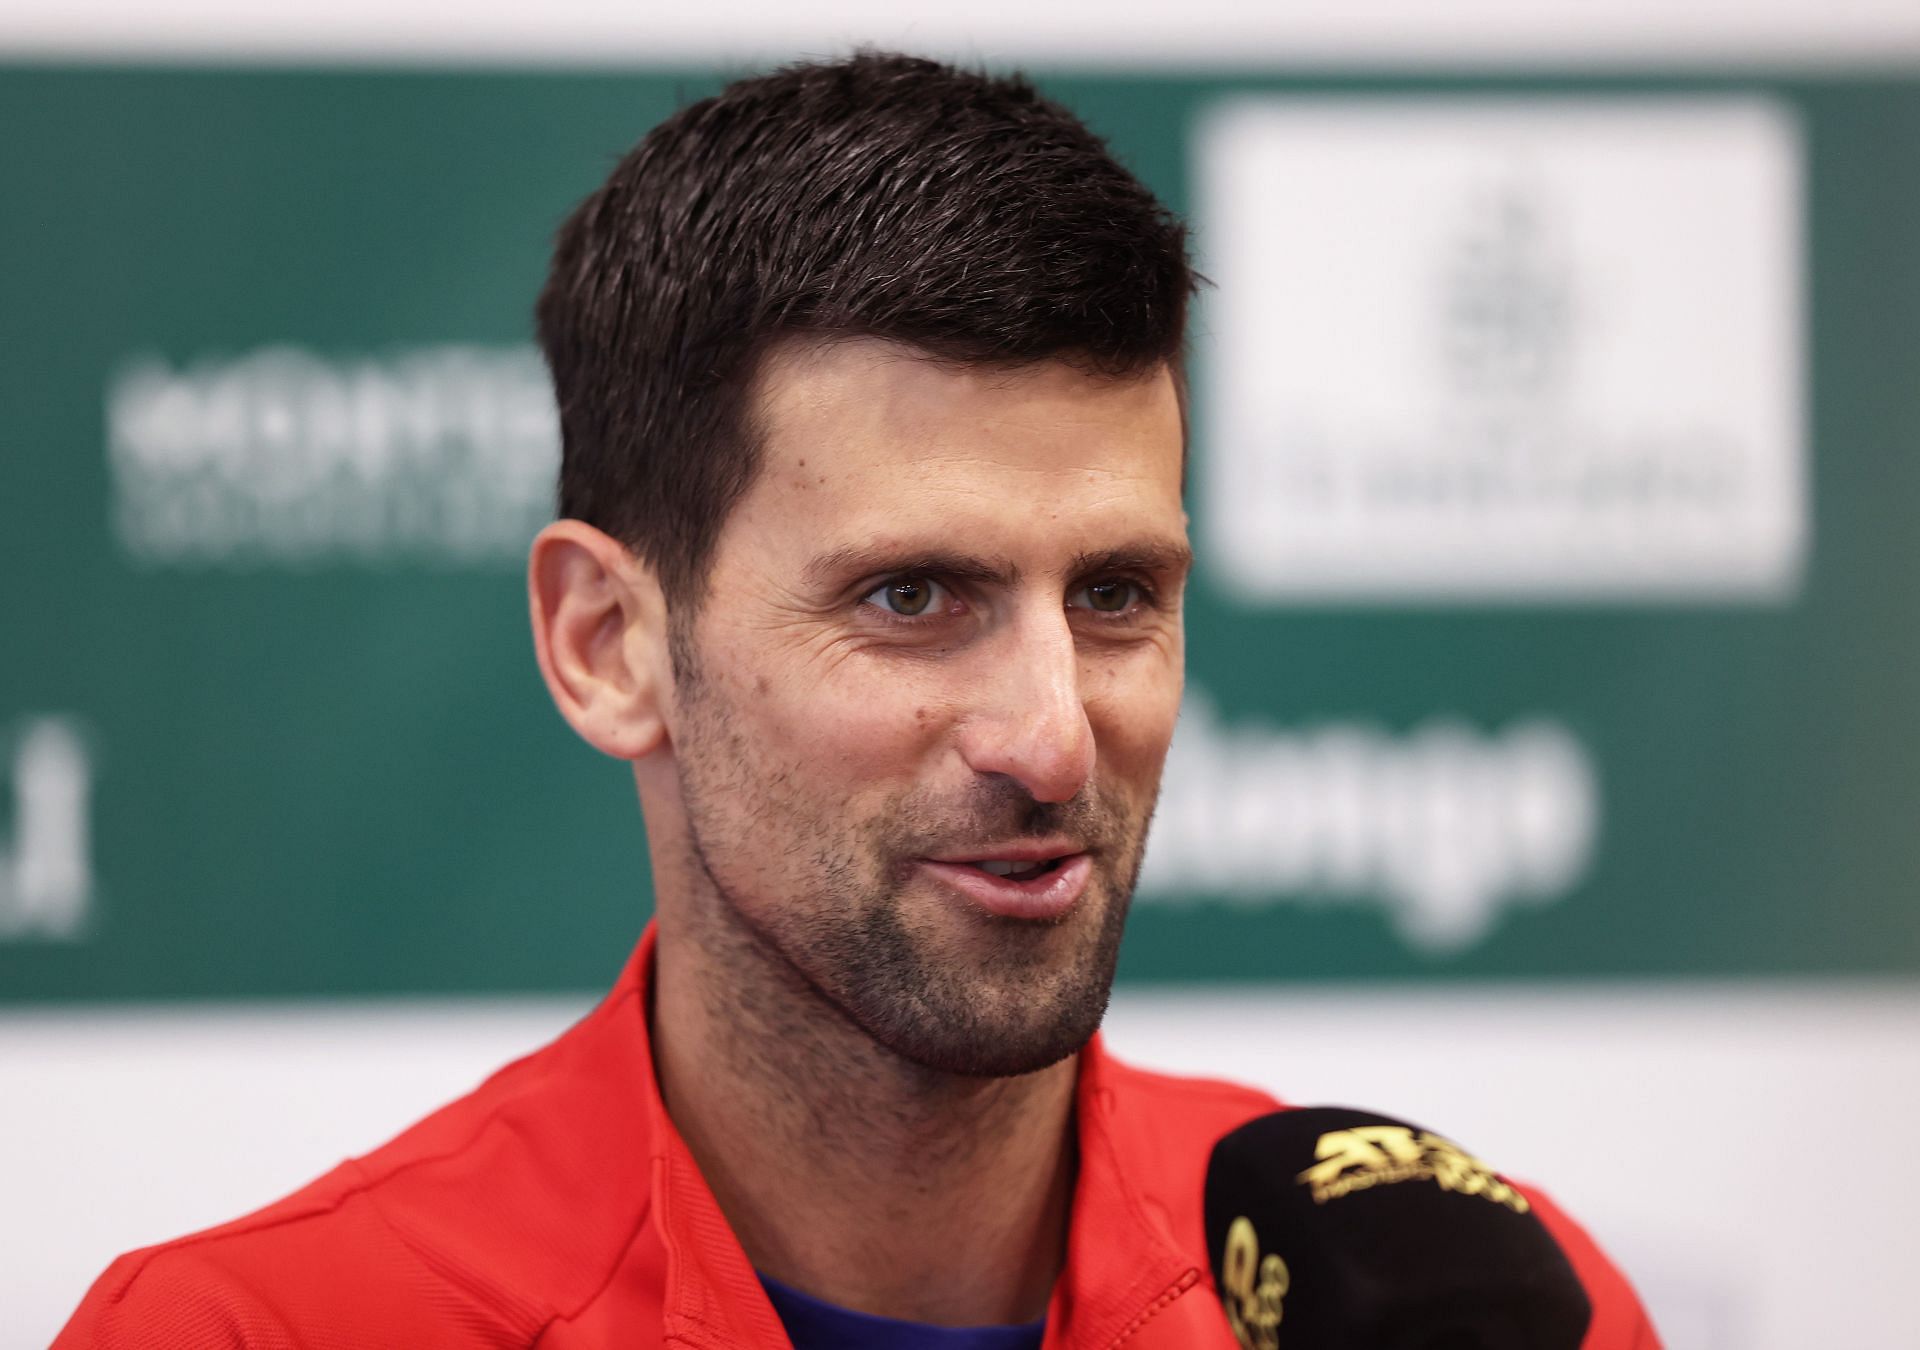 Novak Djokovic was very pleased with the fact that he managed to remain the World No. 1 in 2022